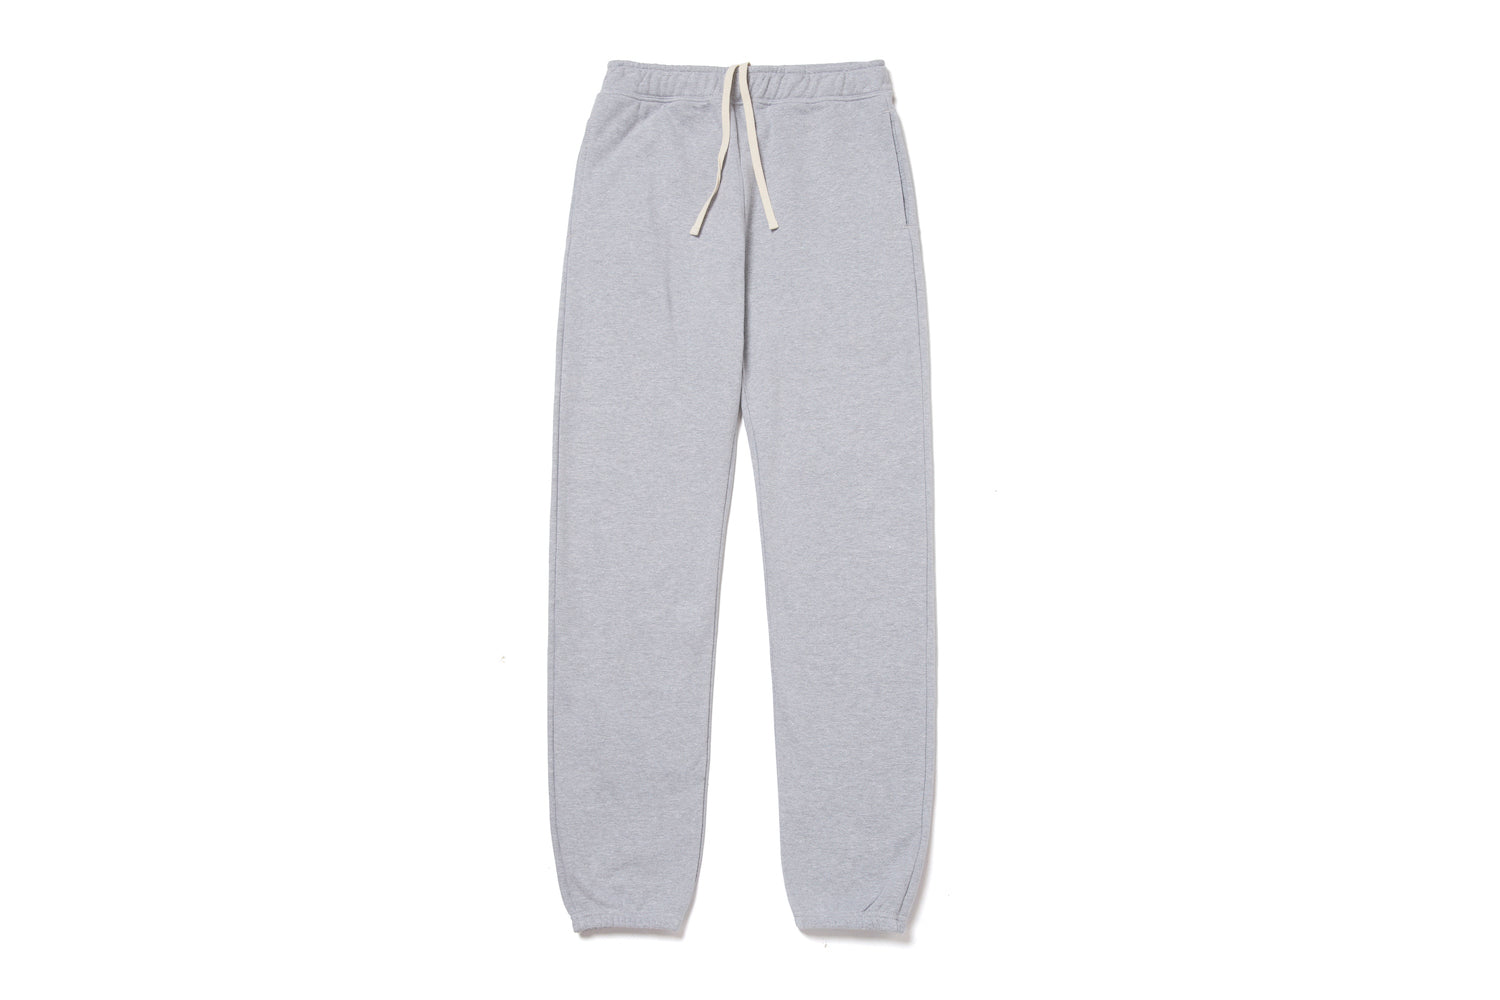 WEXIST Inc Tall Unisex Heather Gray Sweats (Pre-Order Ships 10/25-12/22) M / 37.5 / 11/22-12/22